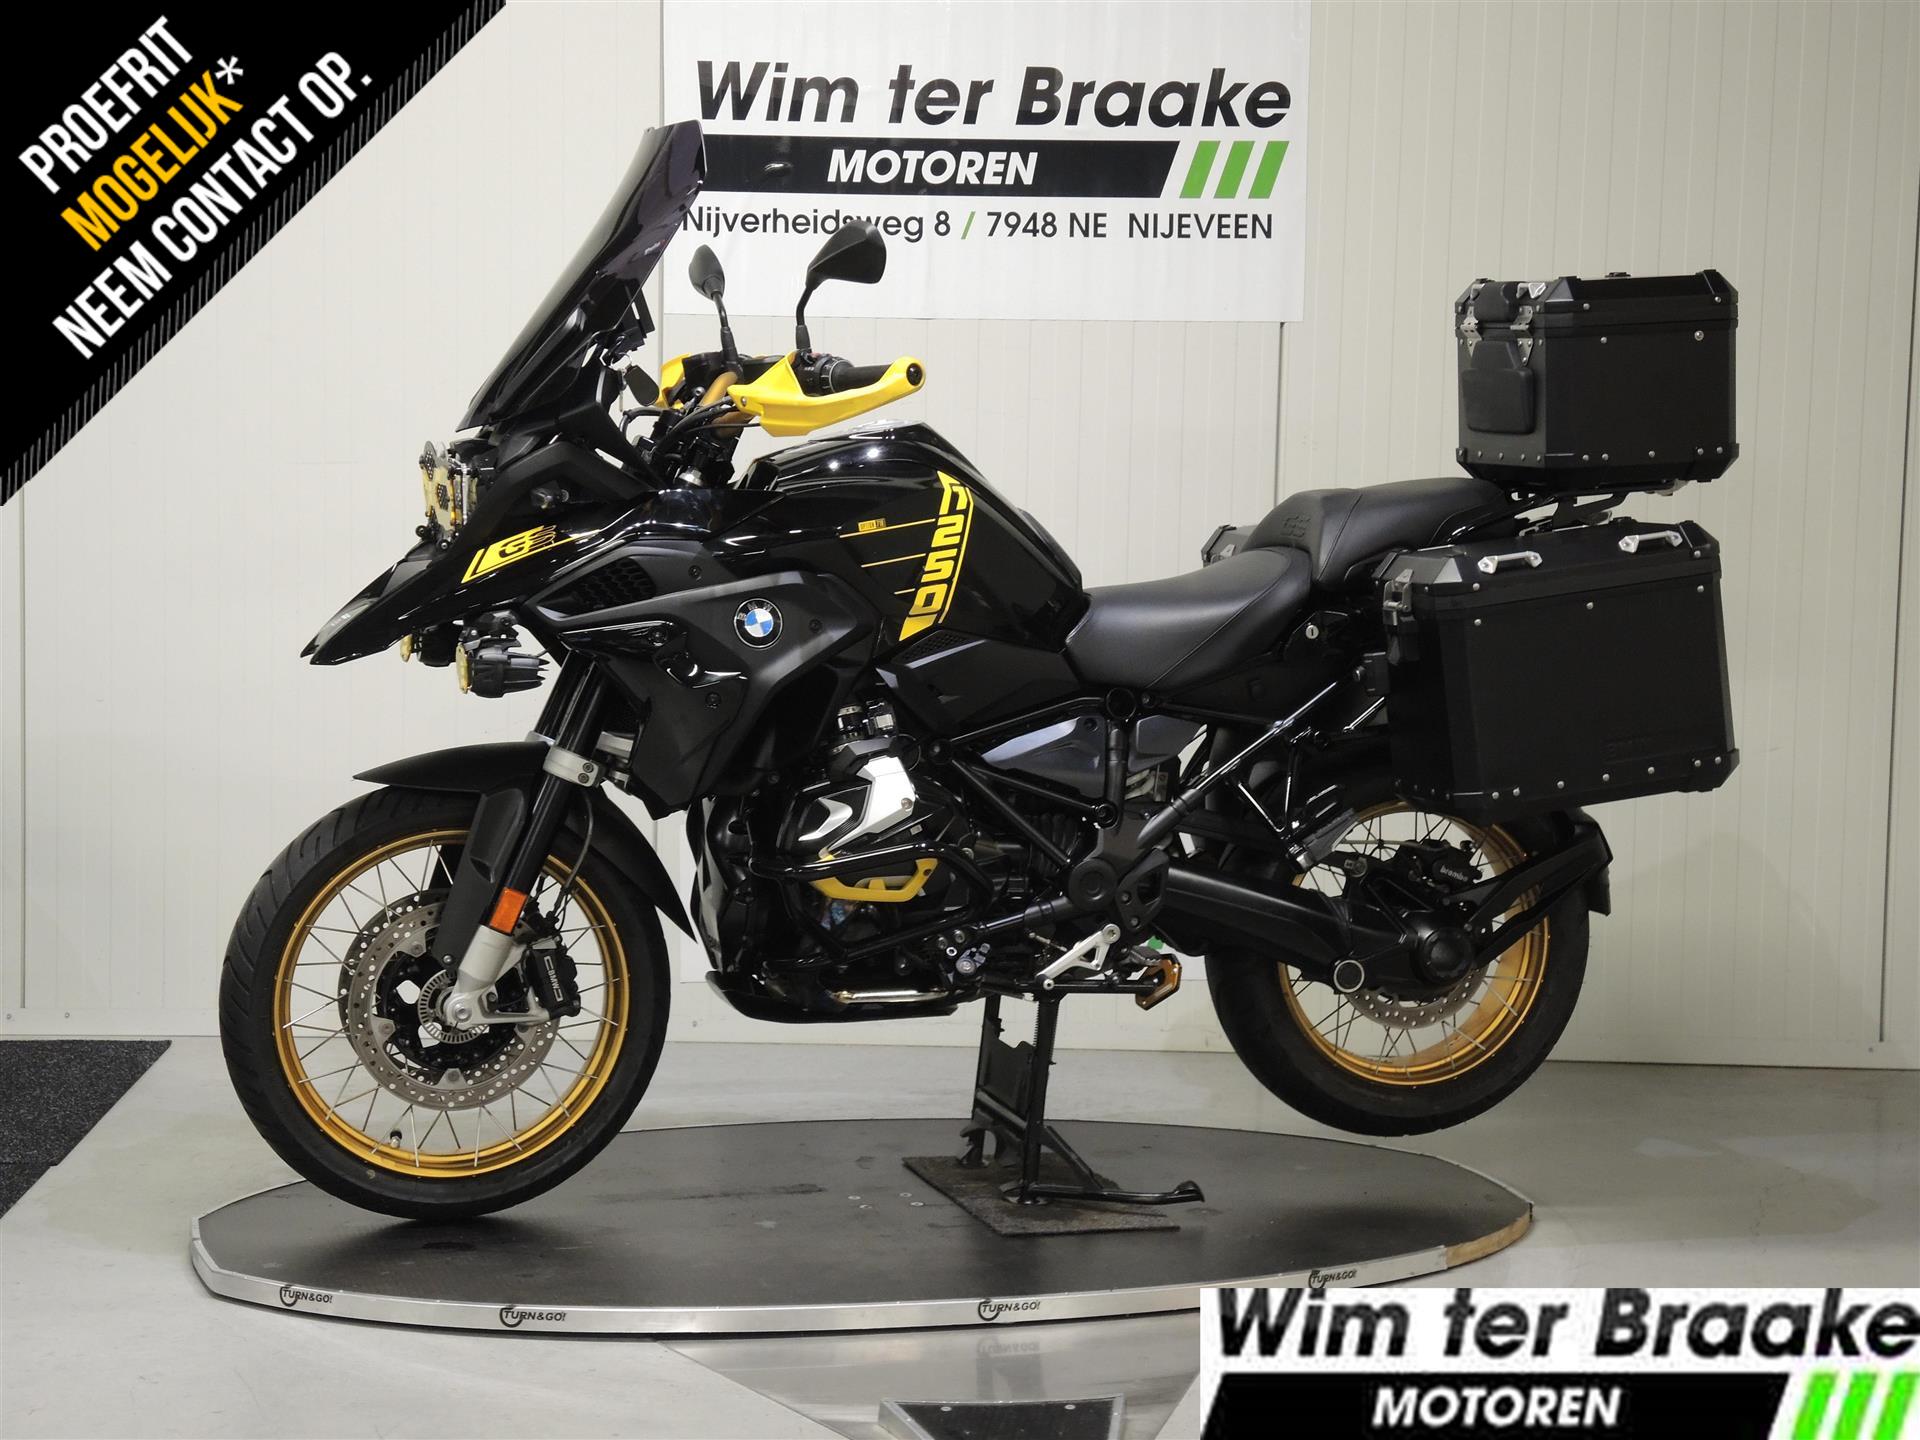 BMW R 1250 GS 40 YEARS GS EDITION bij viaBOVAG.nl